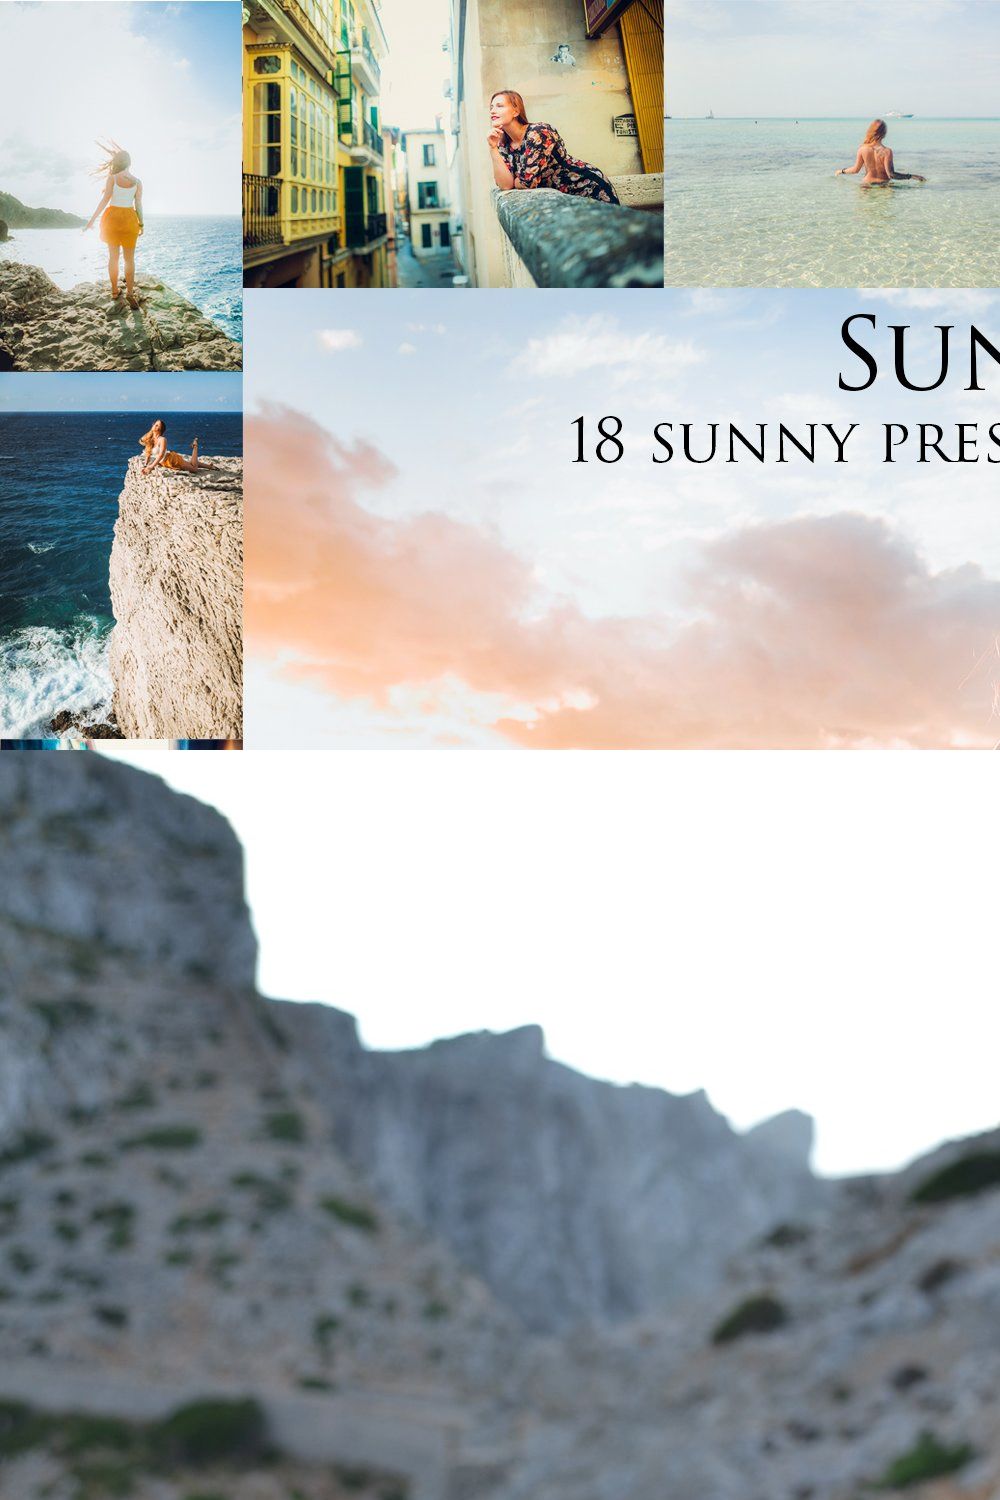 Sunny Sea-18 presets Lr lifestyle pinterest preview image.